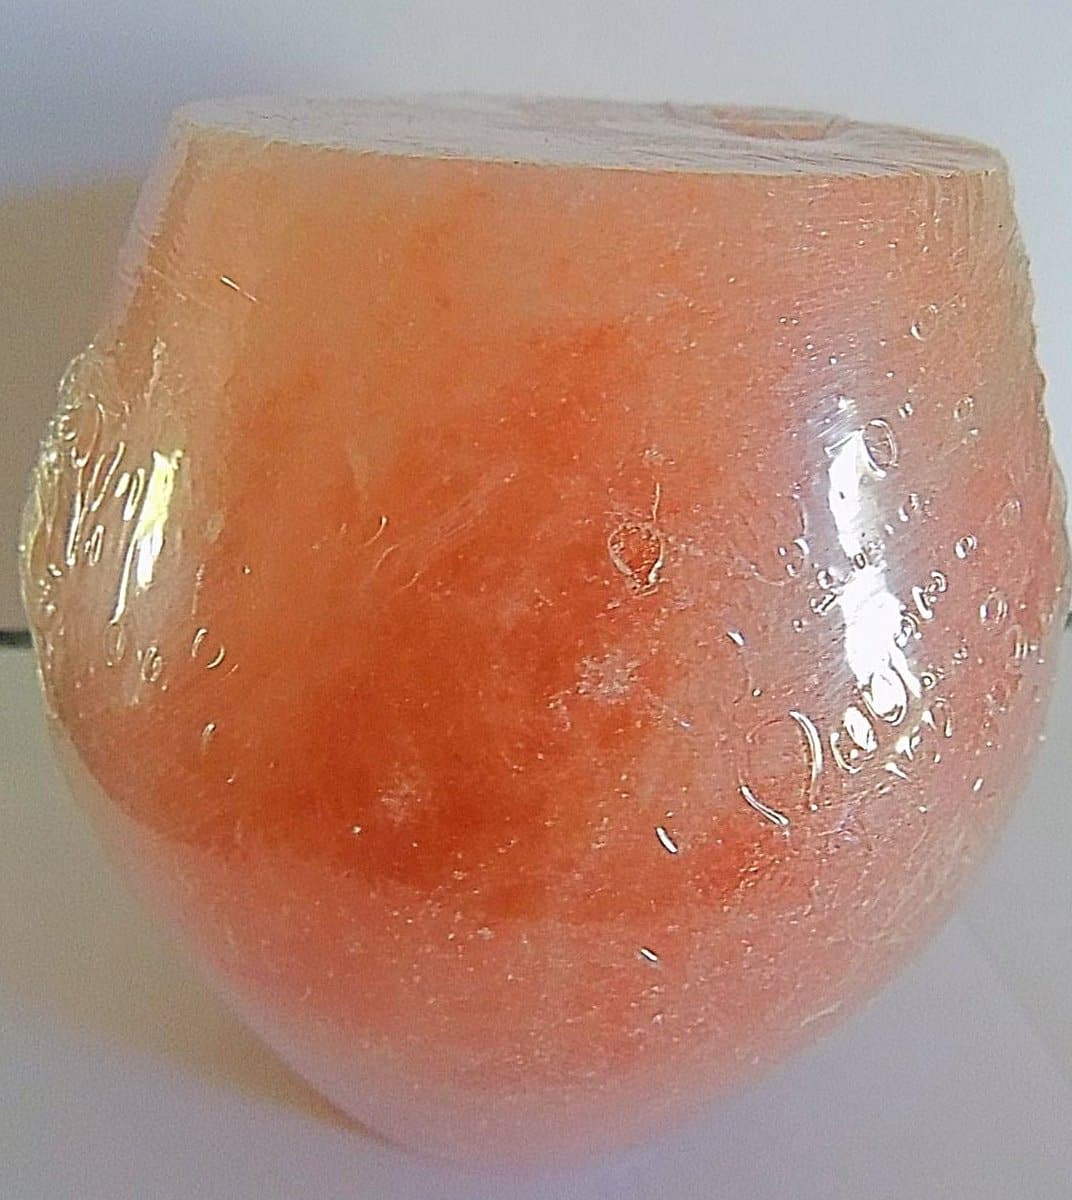 Himalayan Salt Rounded Shape Candle Holder - The House of Awareness